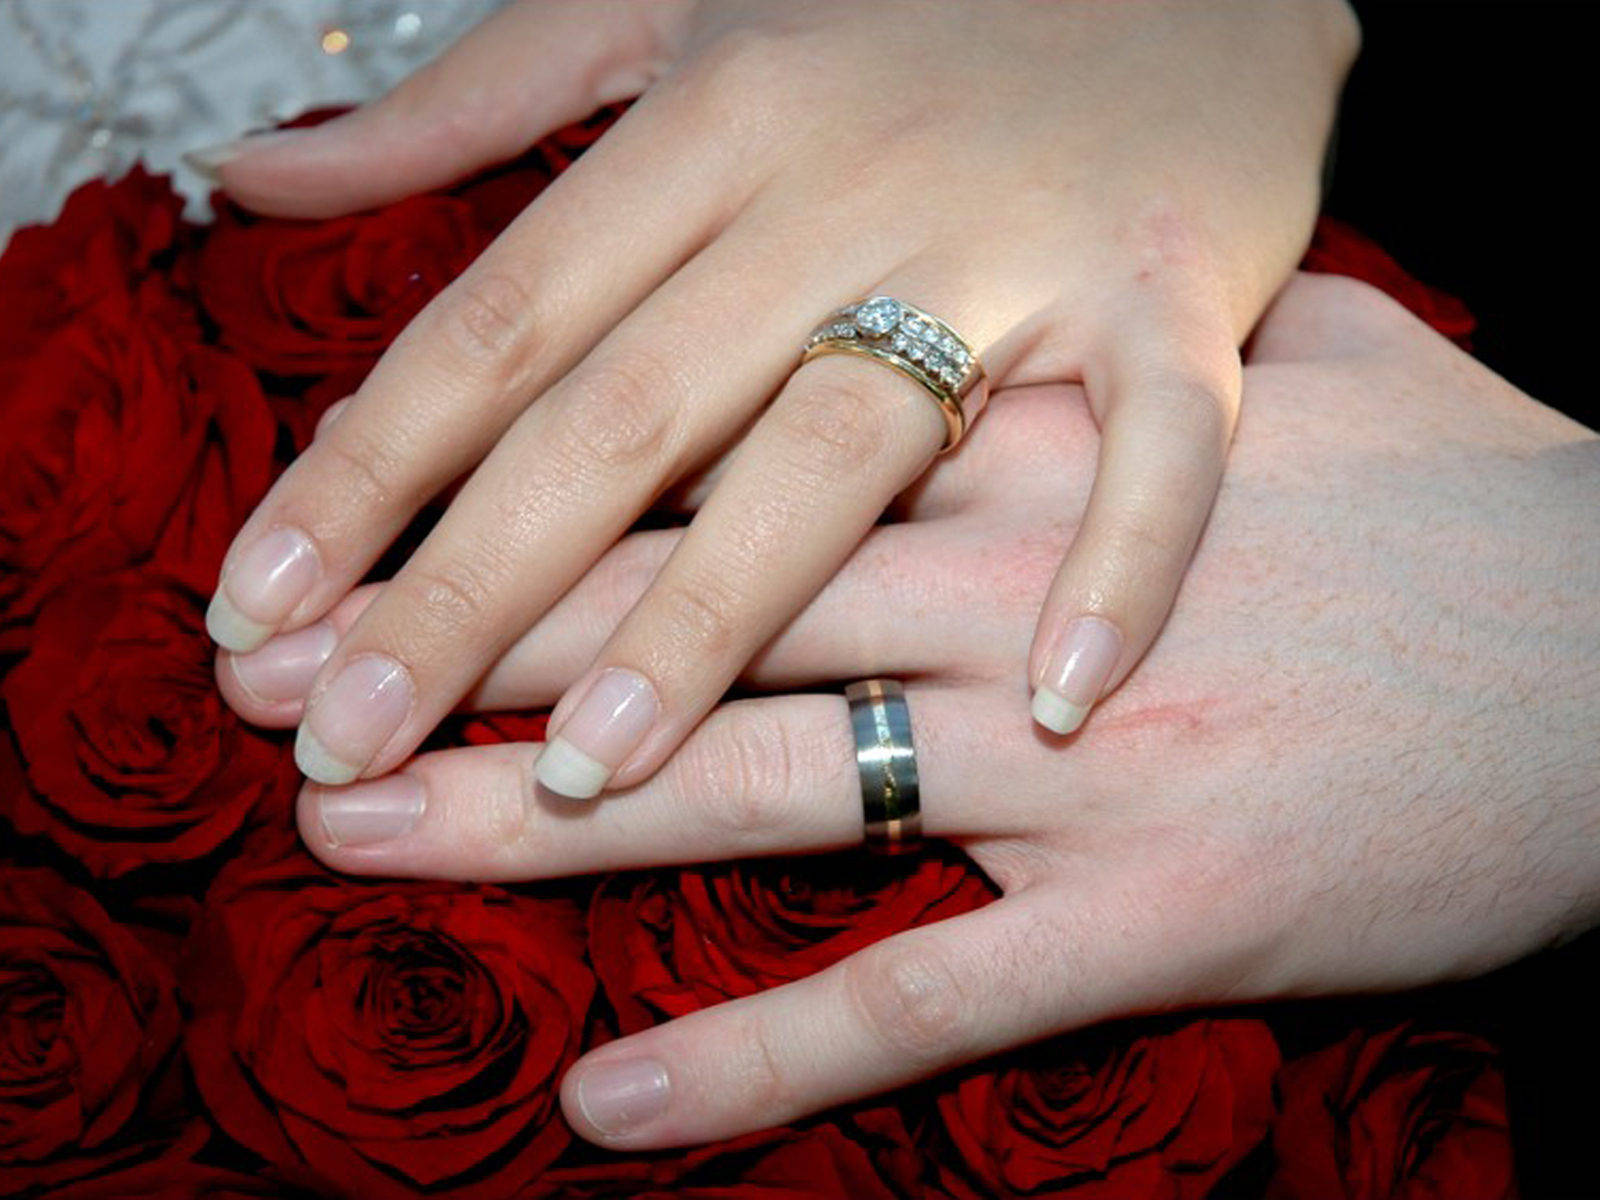 Intimate Holding Hands With Rings On Roses Wallpaper